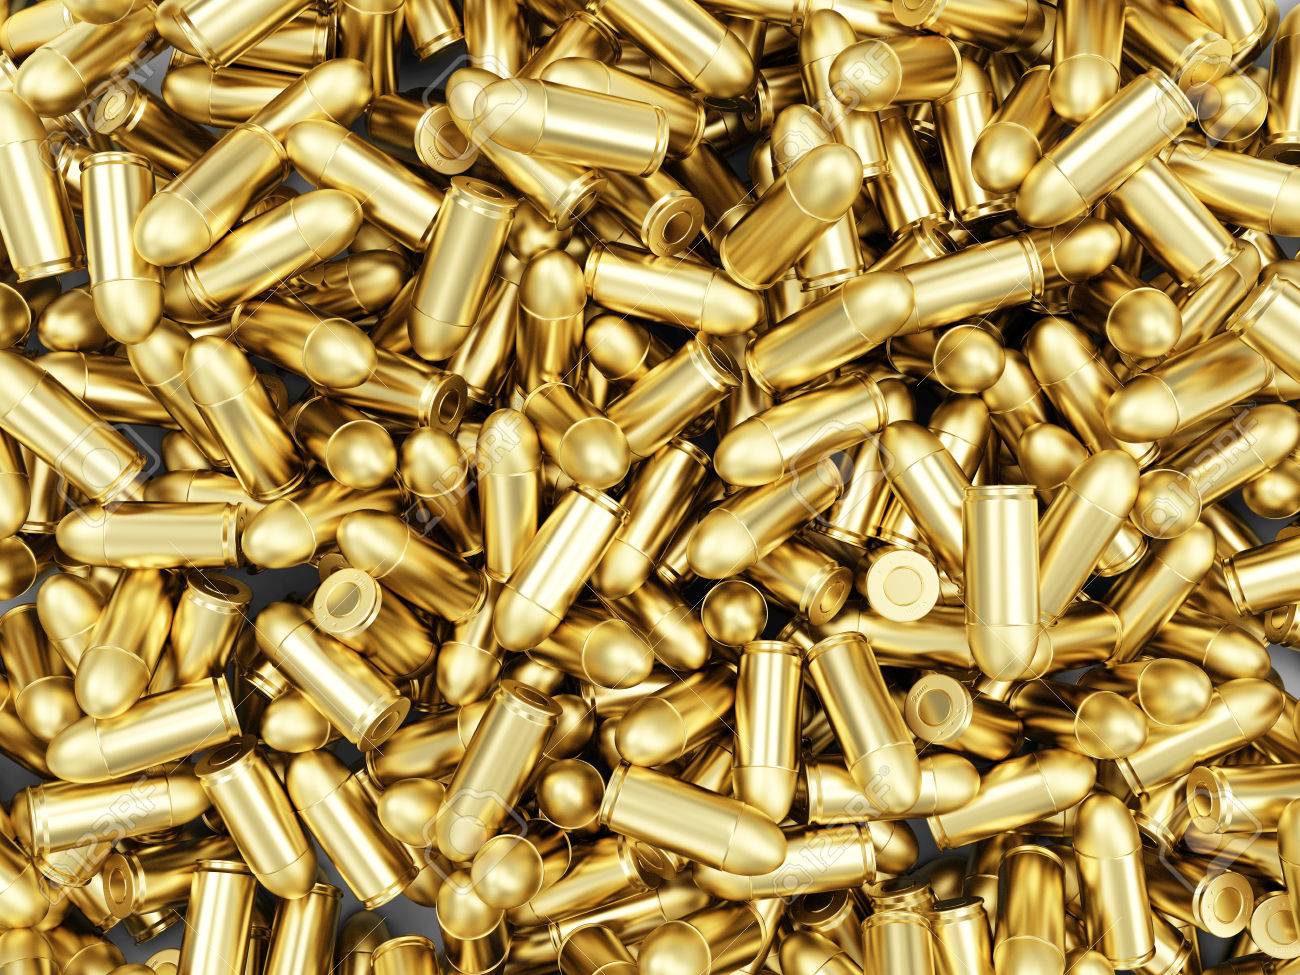 Heap Of Gun Bullets 9mm Background Military Weapons Concept Stock